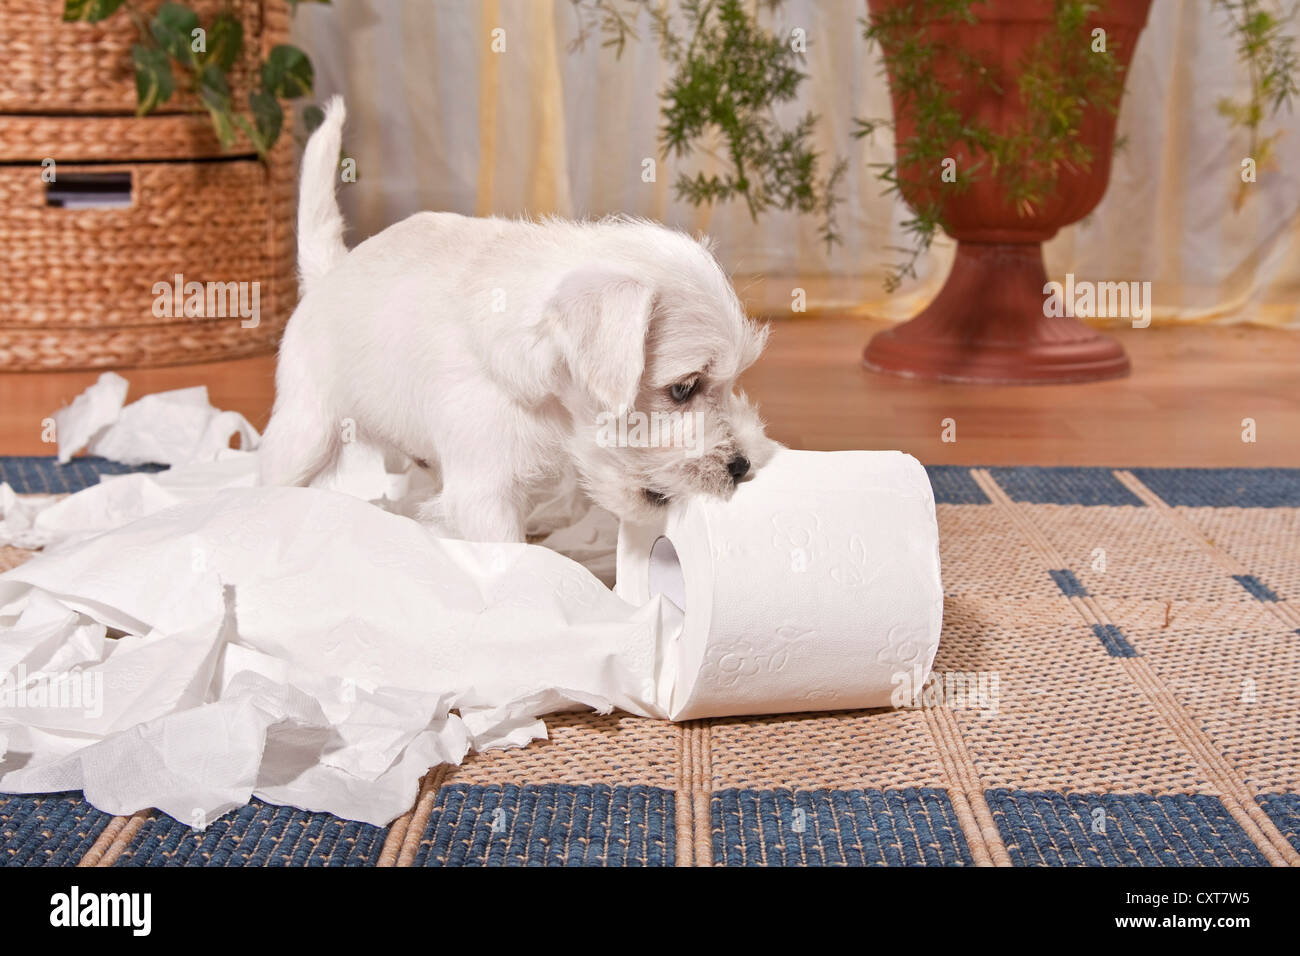 Cheeky white Miniature Schnauzer puppy surrounded by shredded toilet paper Stock Photo